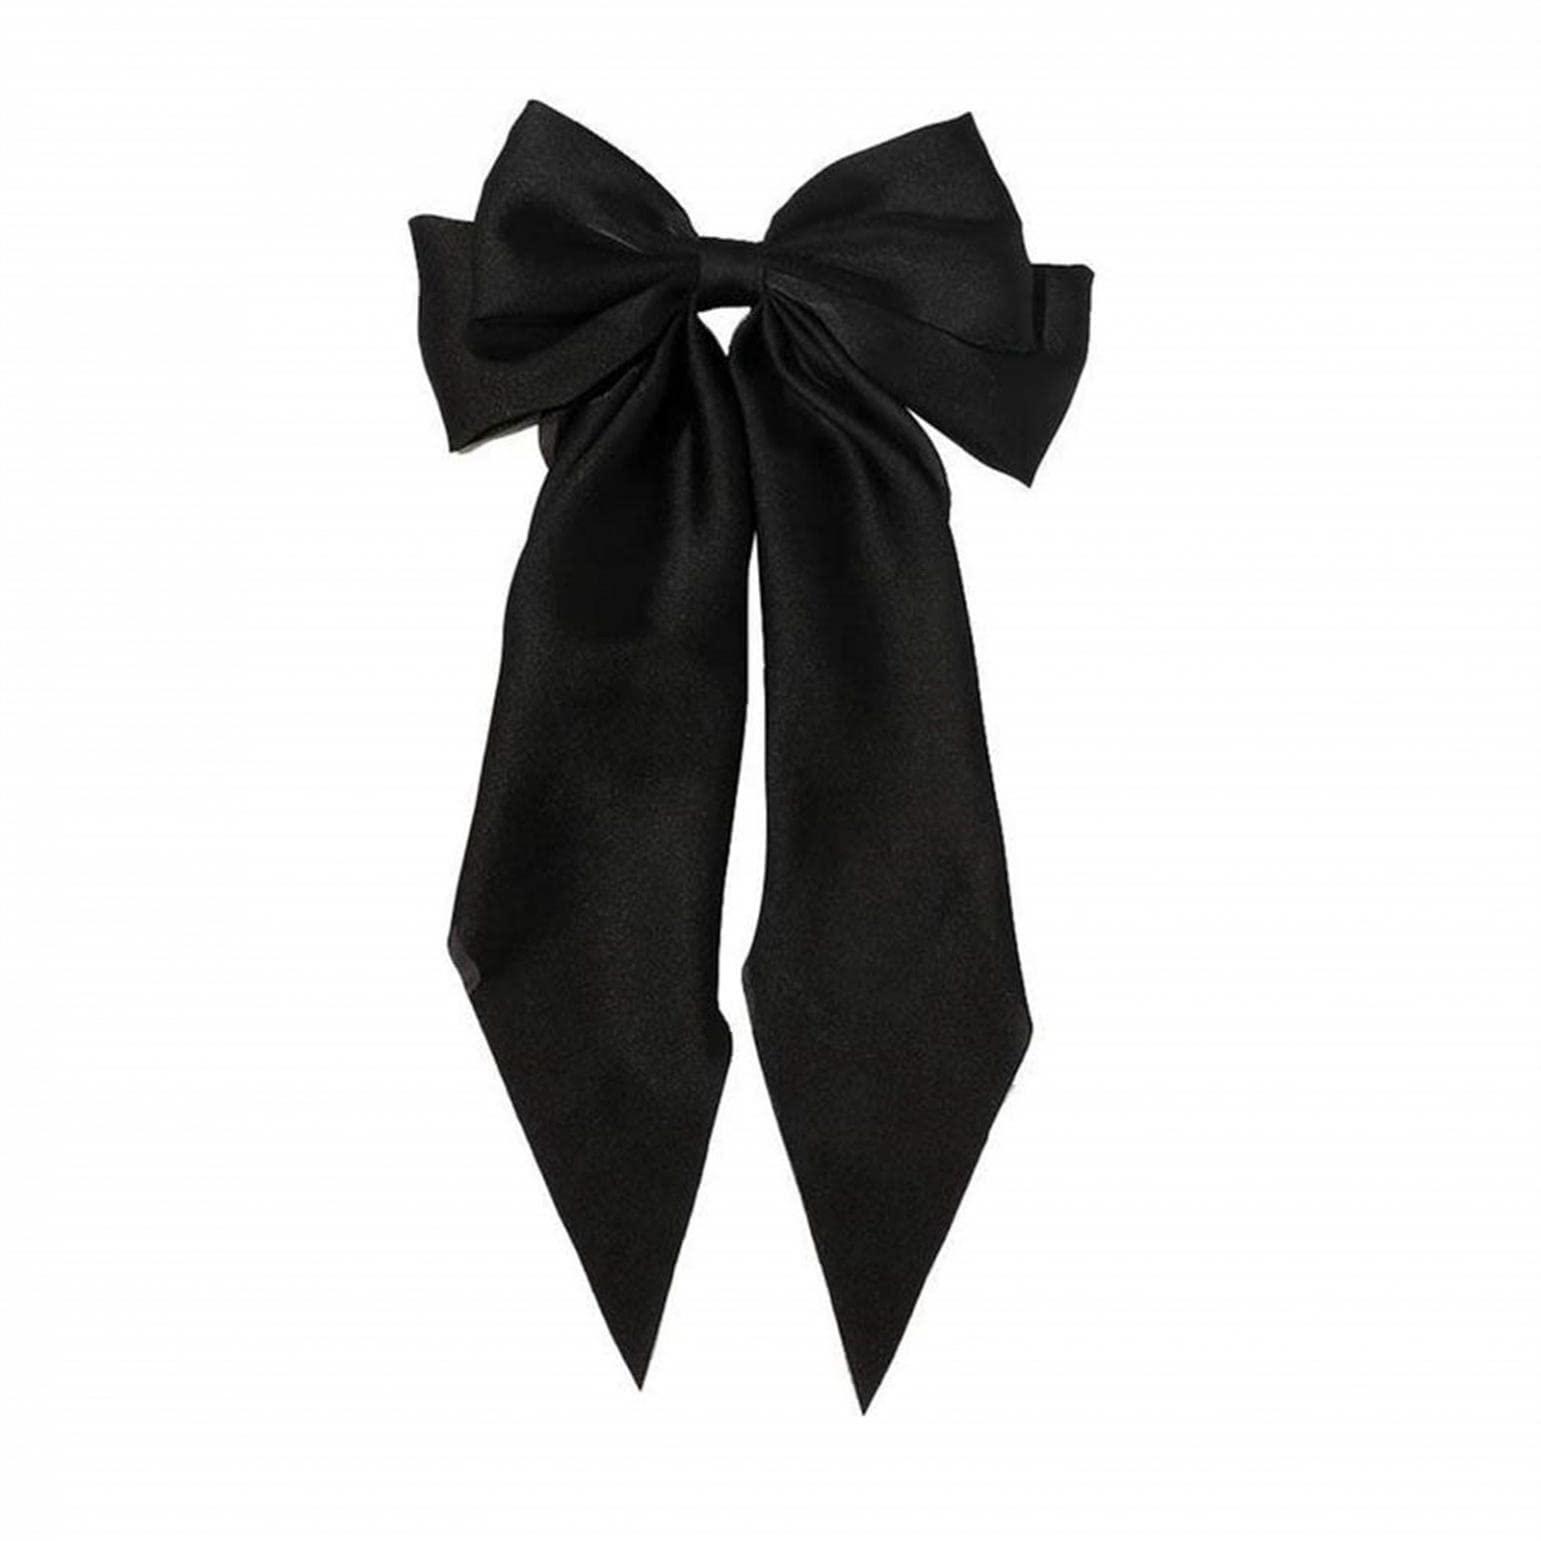 LULUZ Large Hair Bows for Women Big Bow Hair Clip Girl Elegant French Ribbon Barrette with Long Silky Tail Solid Color Bowknot Hairpin Black